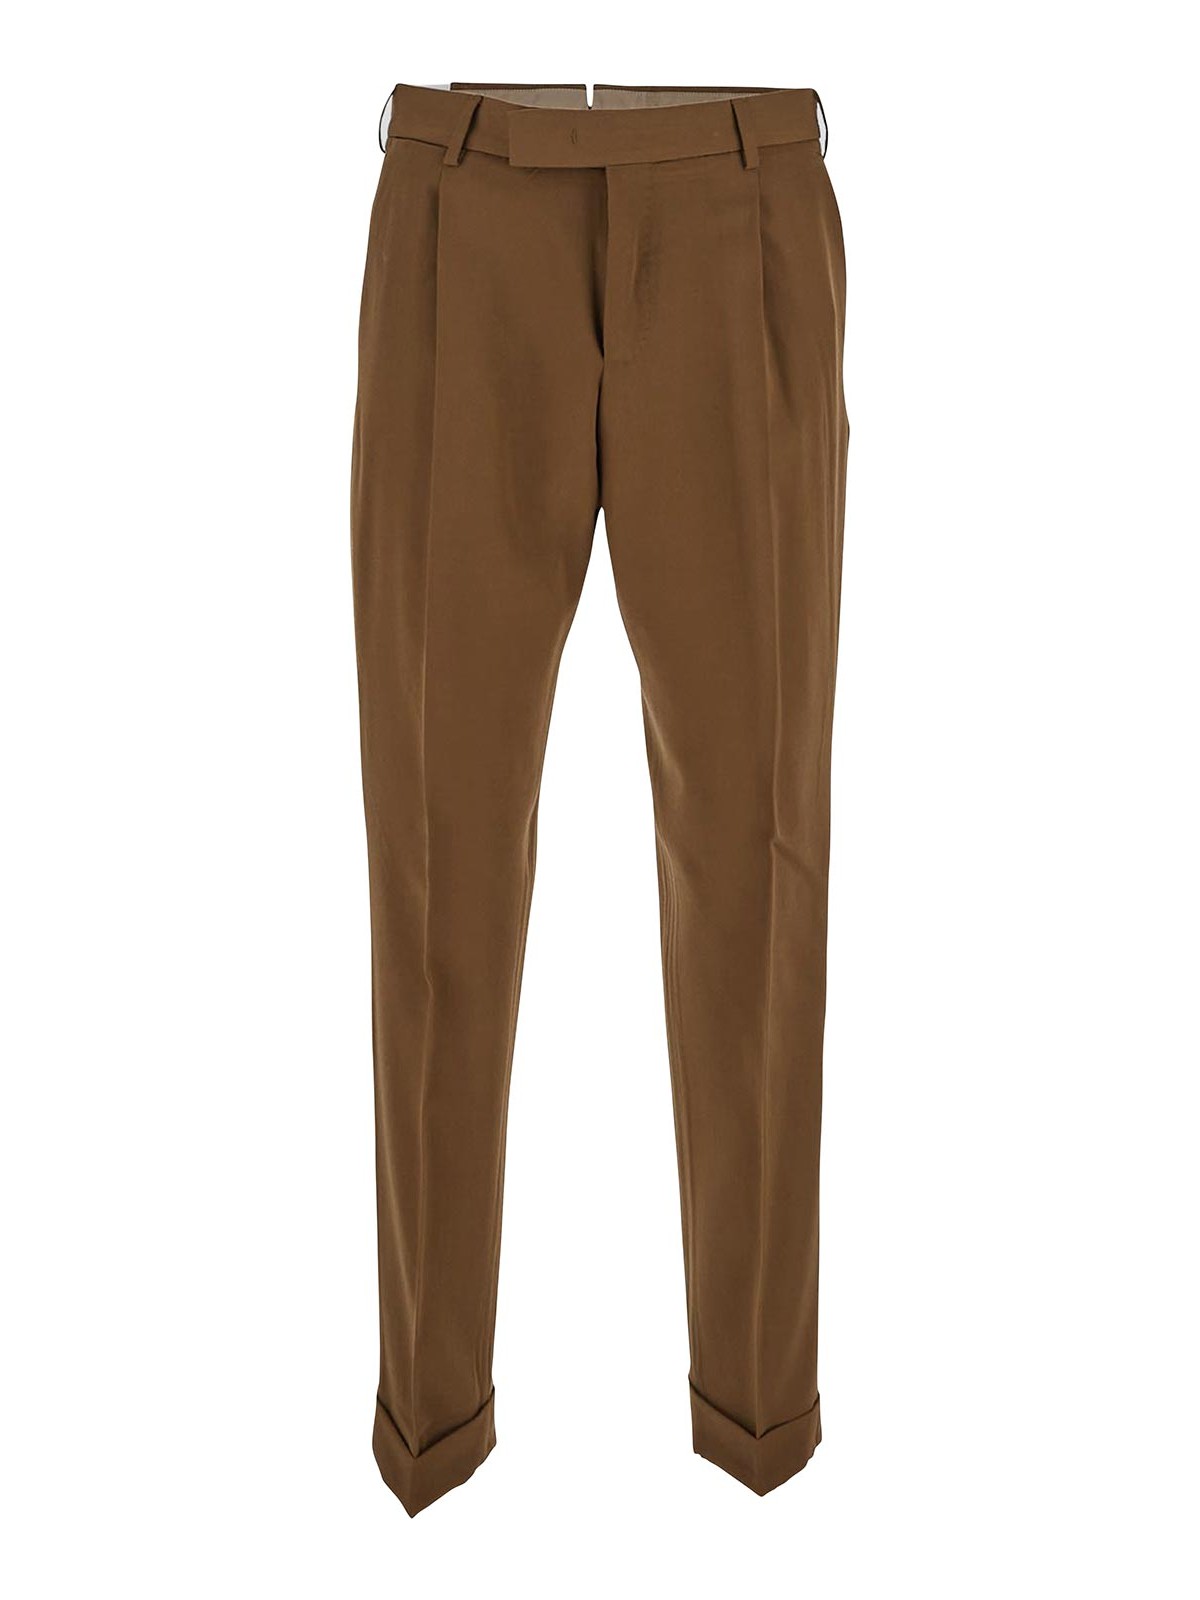 Pt Torino Brown Trousers With Side Pockets